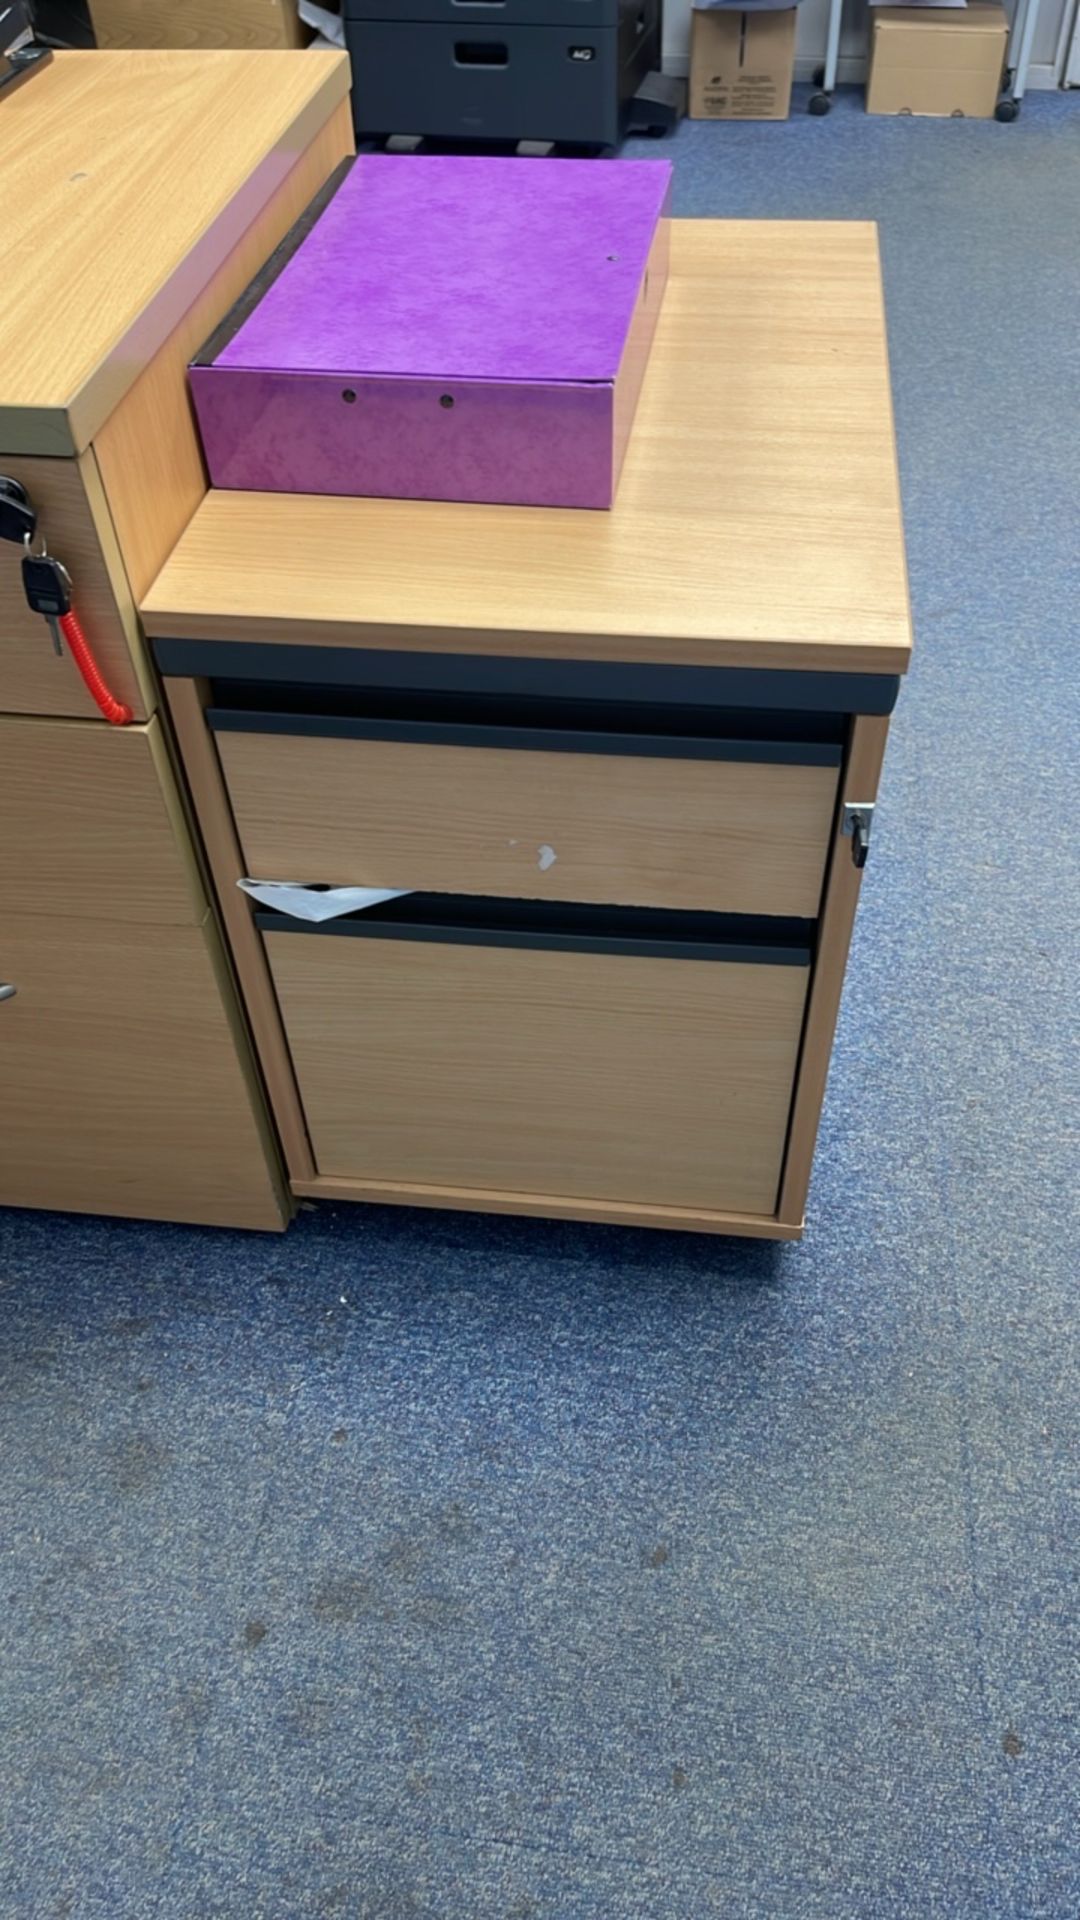 Bank Of 4 Desks, Chairs & Drawers - Image 11 of 18